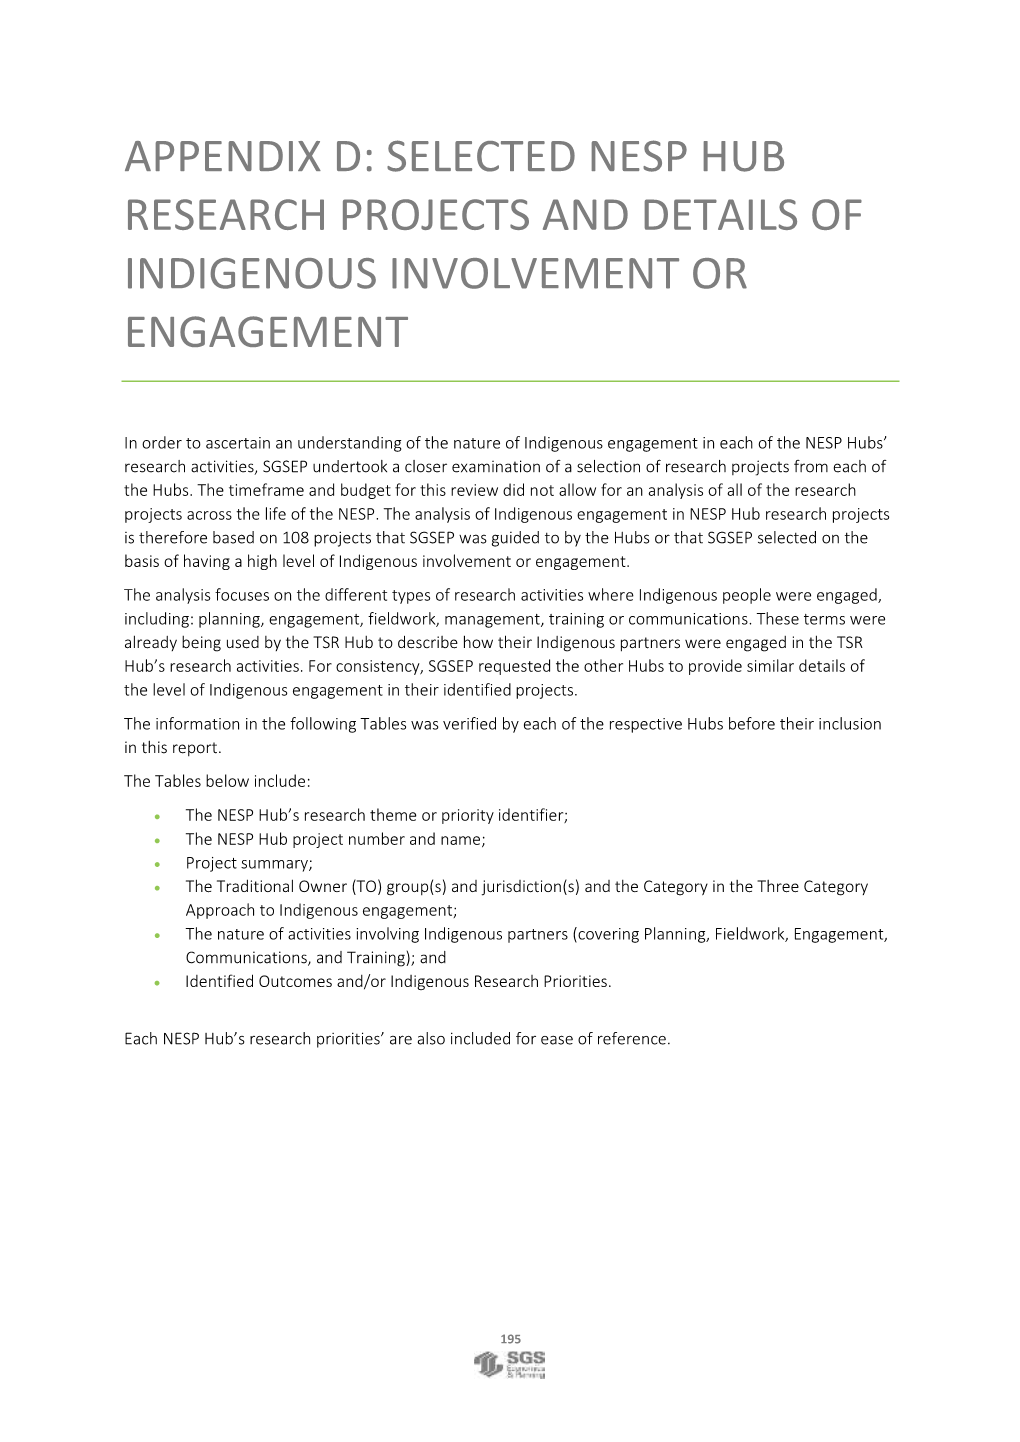 Nesp Hub Research Projects and Details of Indigenous Involvement Or Engagement